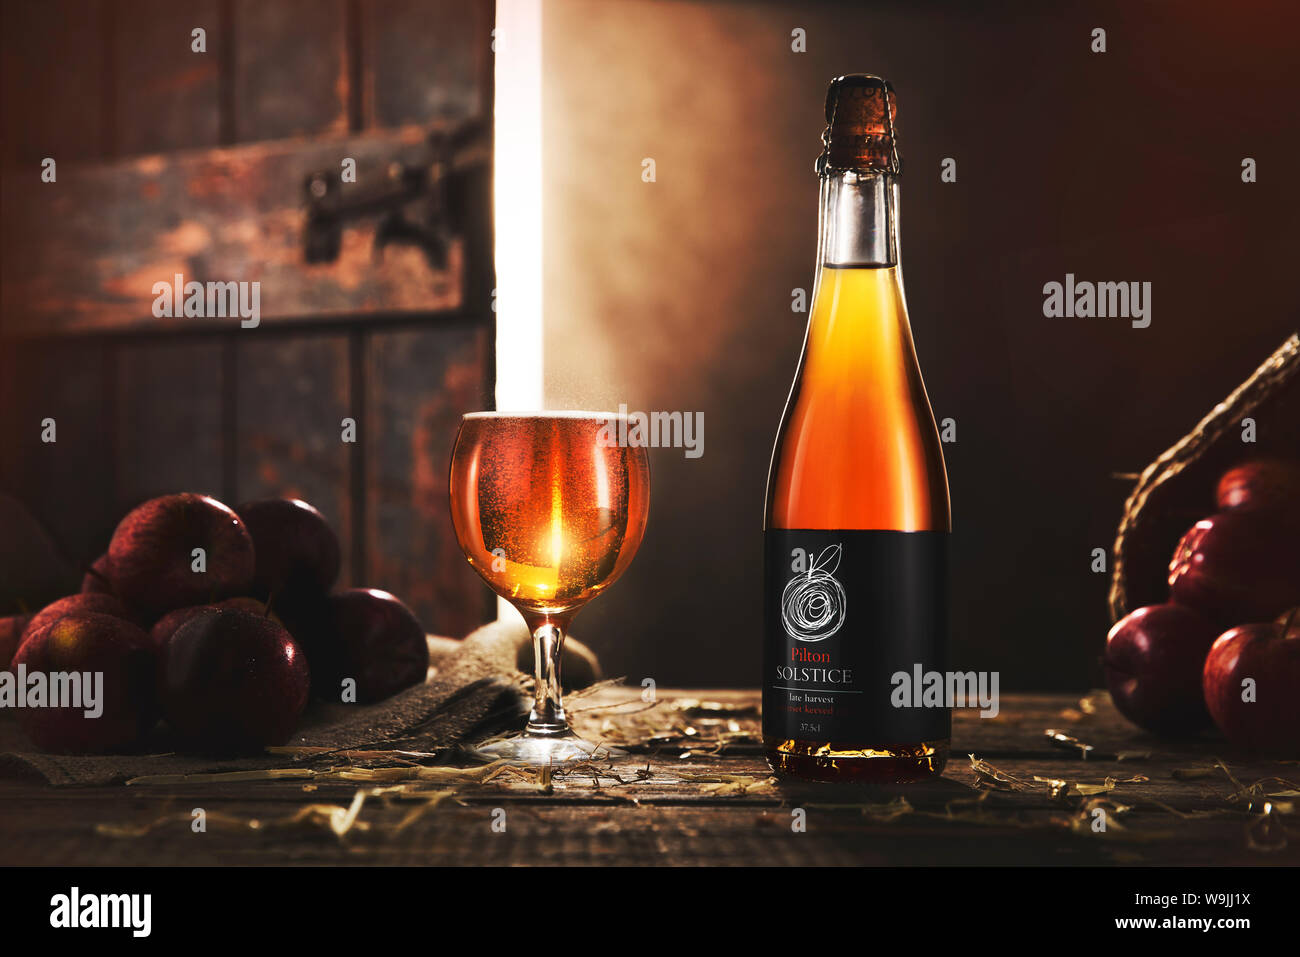 Pilton Solstice Cider on wooden table with a barn door open behind and light coming through. Stock Photo